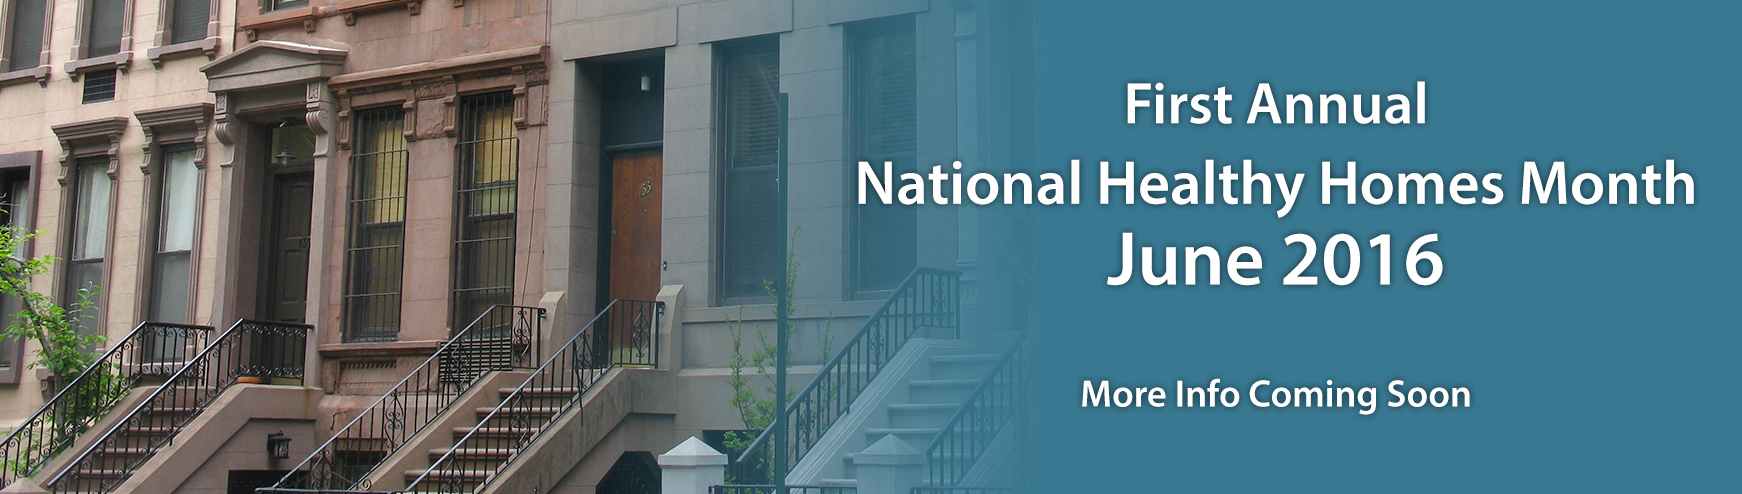 First National Healthy Homes Month